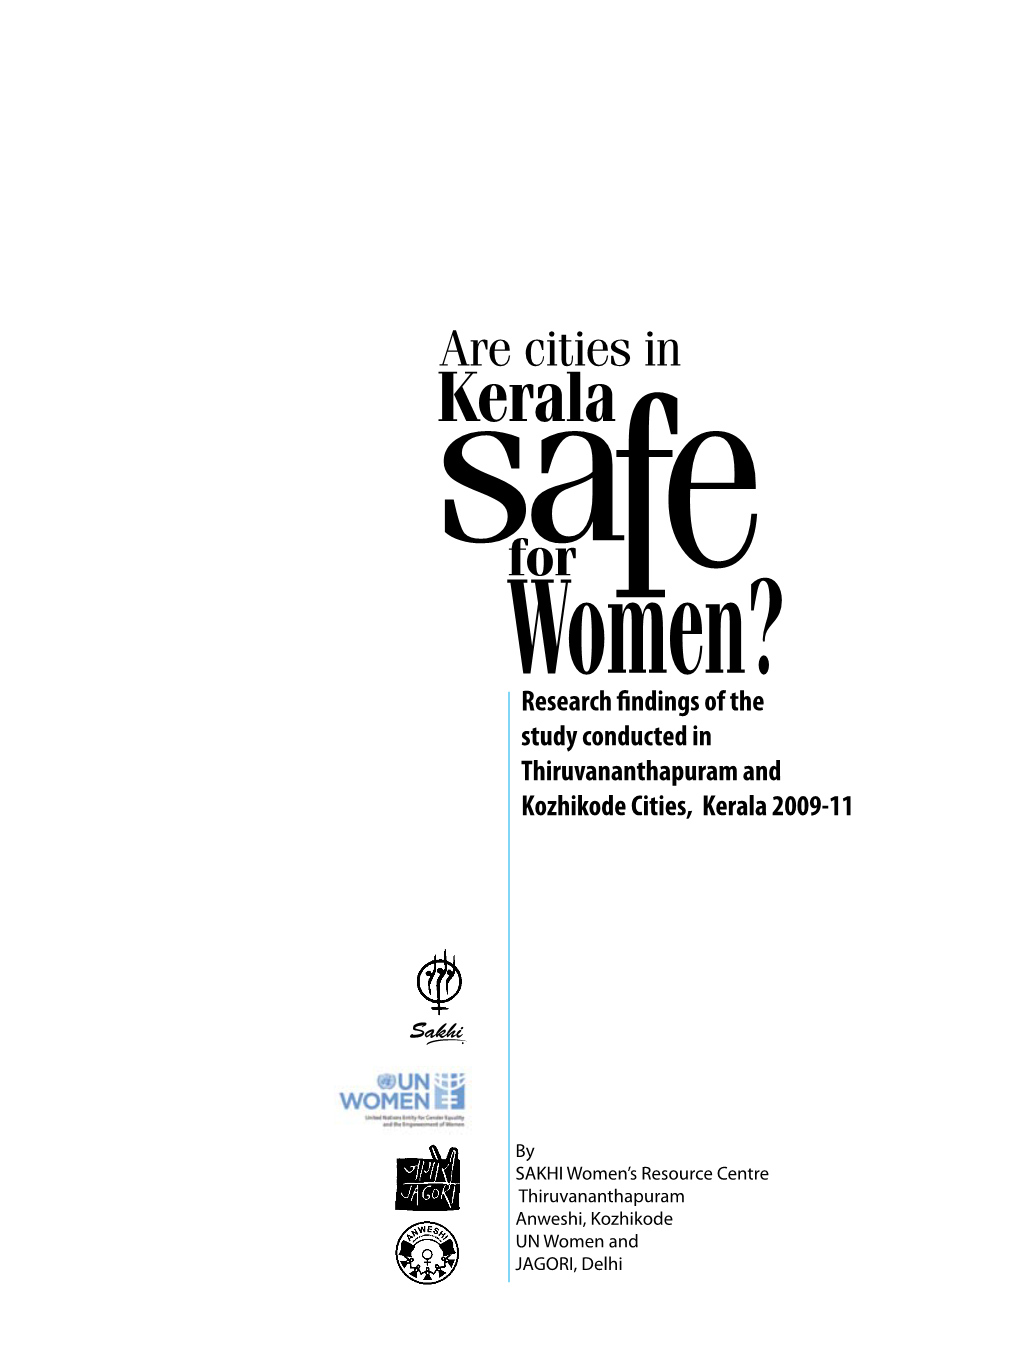 Research Findings of the Study Conducted in Thiruvananthapuram and Kozhikode Cities, Kerala 2009-11